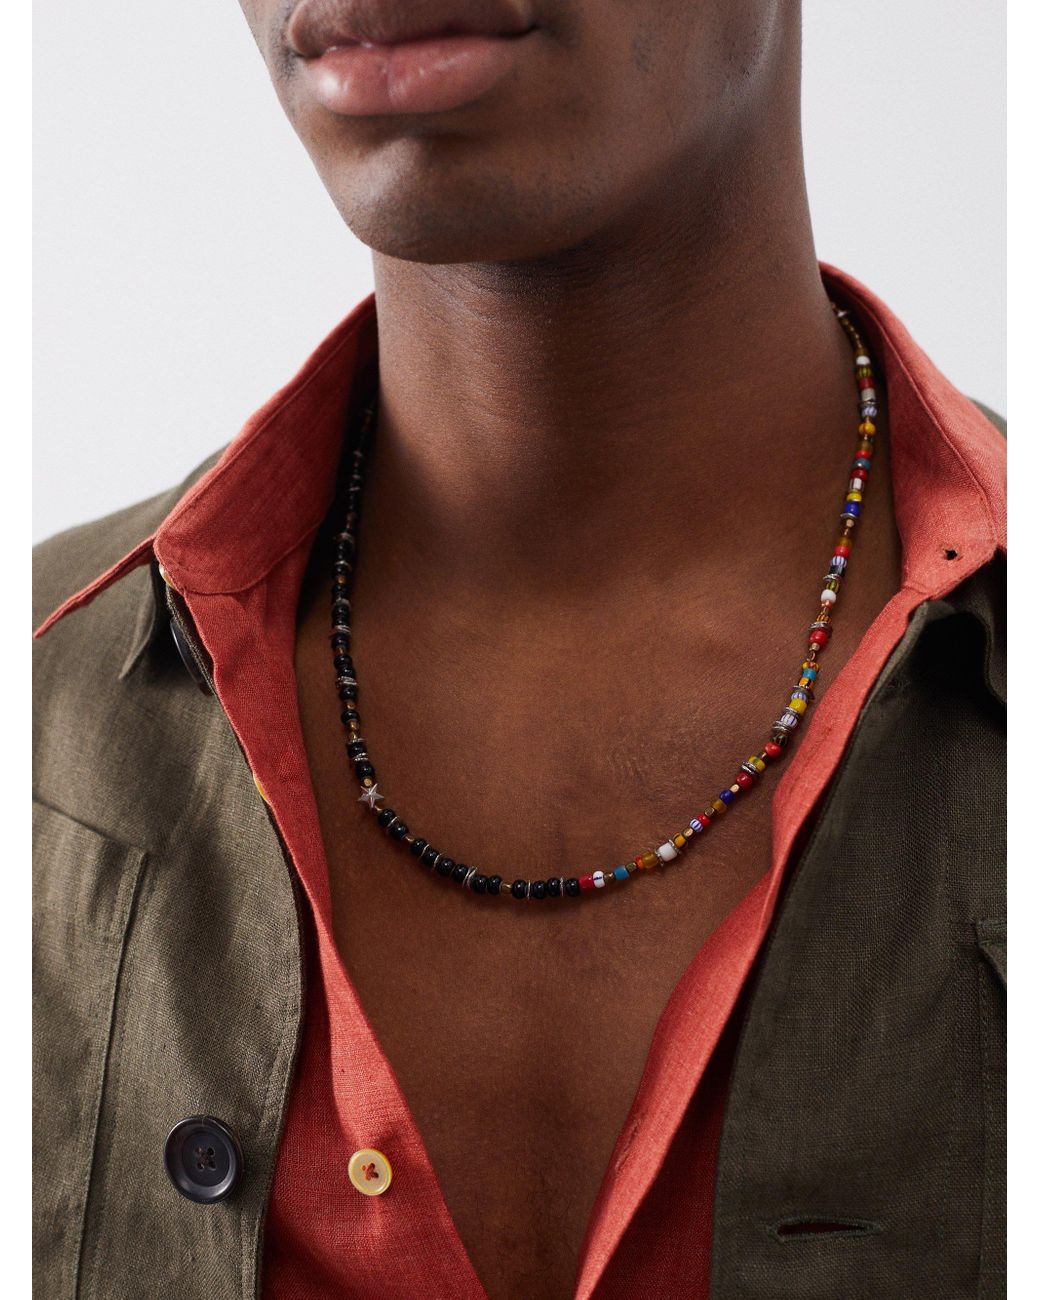 PAUL SMITH Silver-Tone and Enamel Beaded Necklace for Men